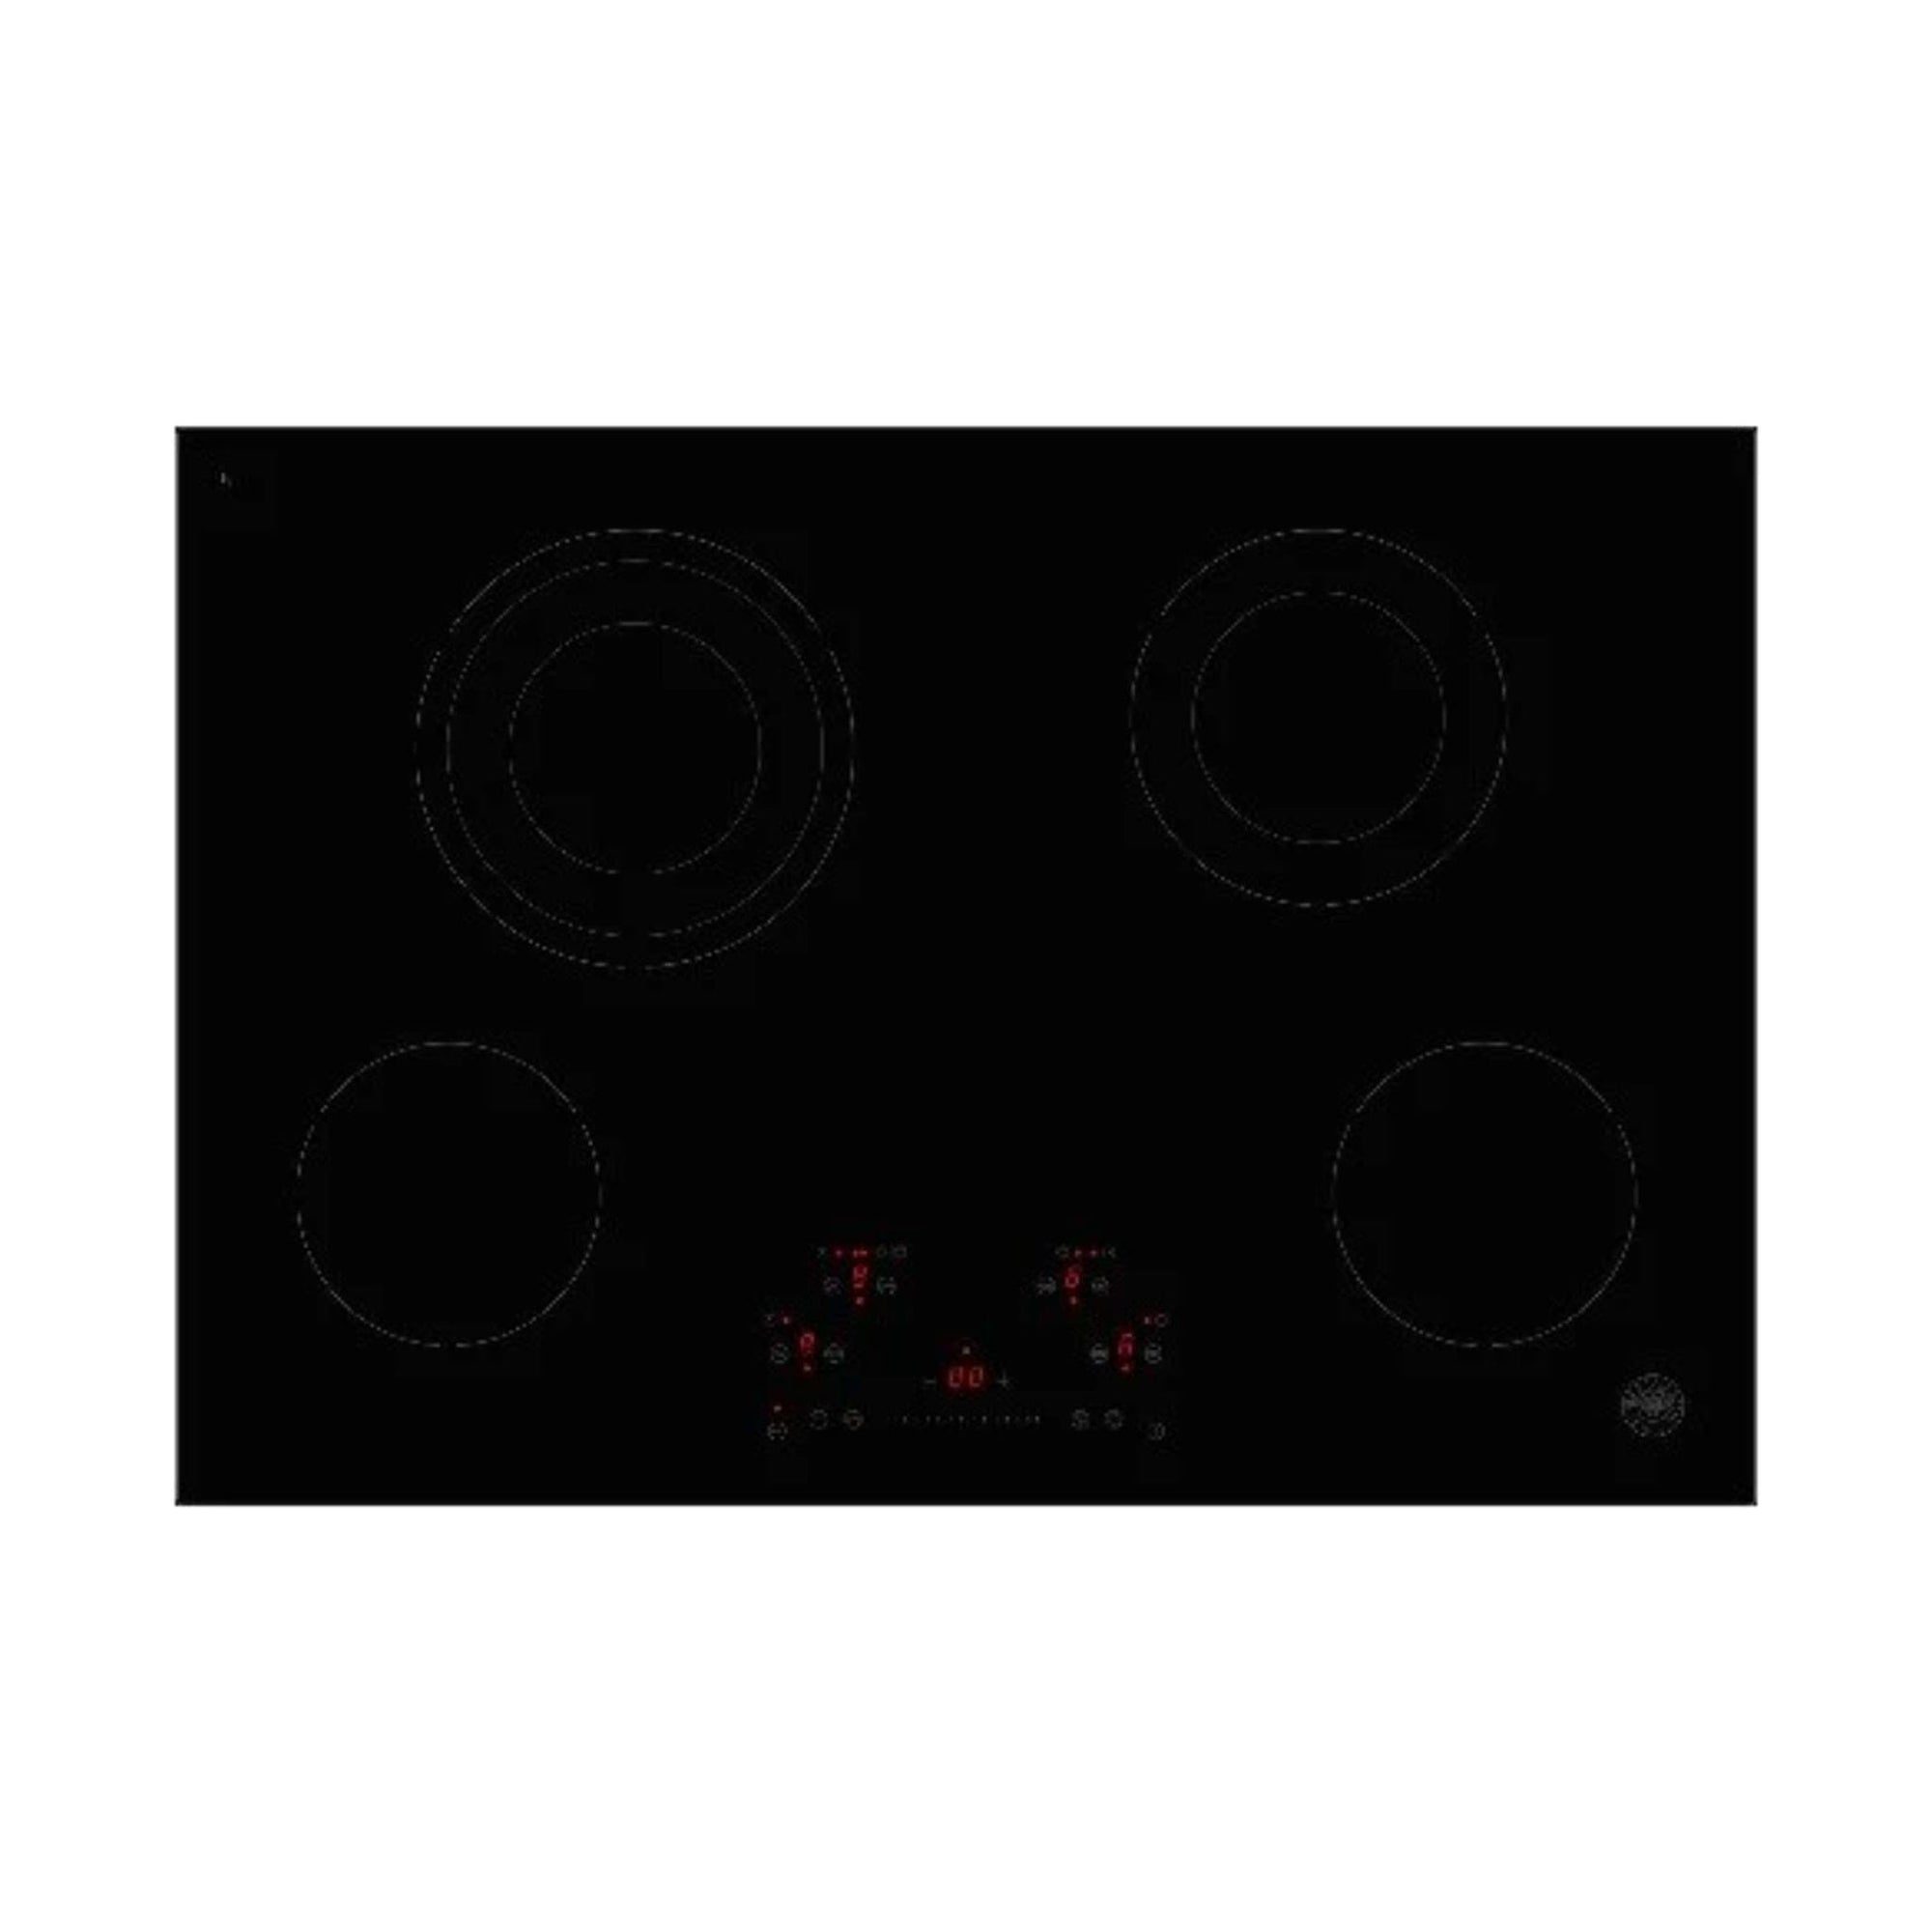 24" Ceran Touch Control Cooktop 4 Heating Zones - Culinary Hardware